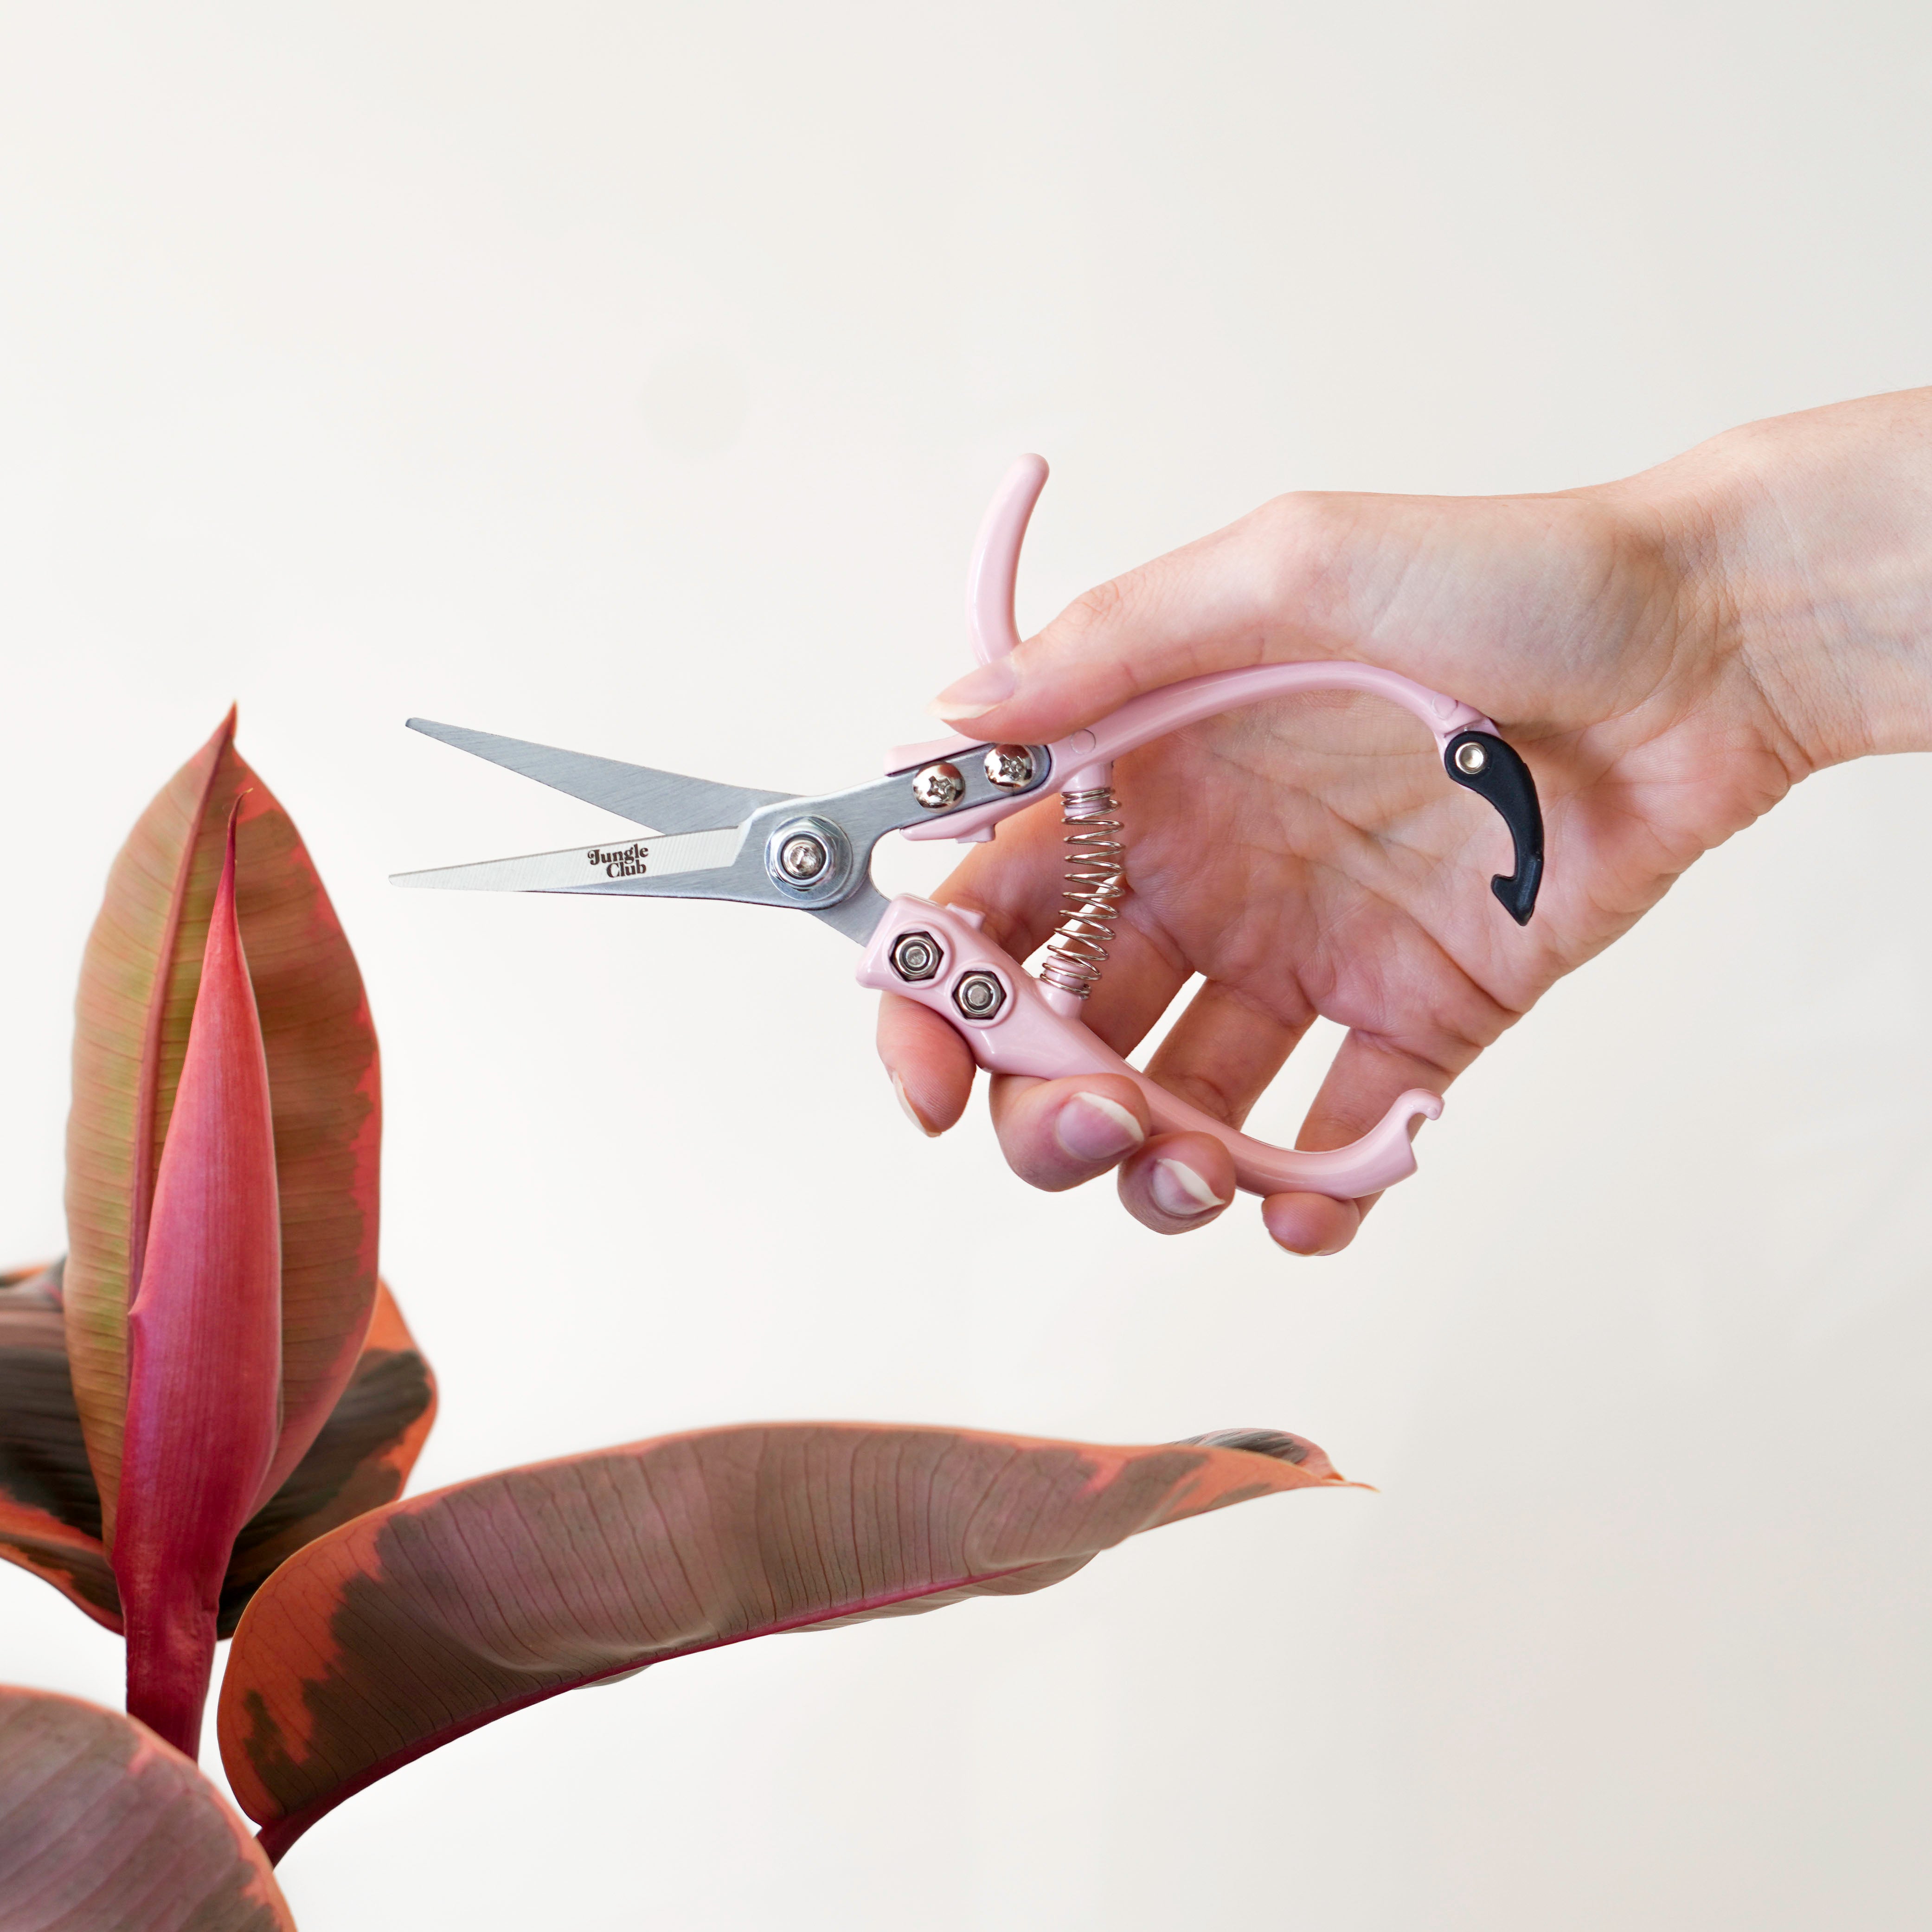 The pink pruning shears in action staged next to a plant. 